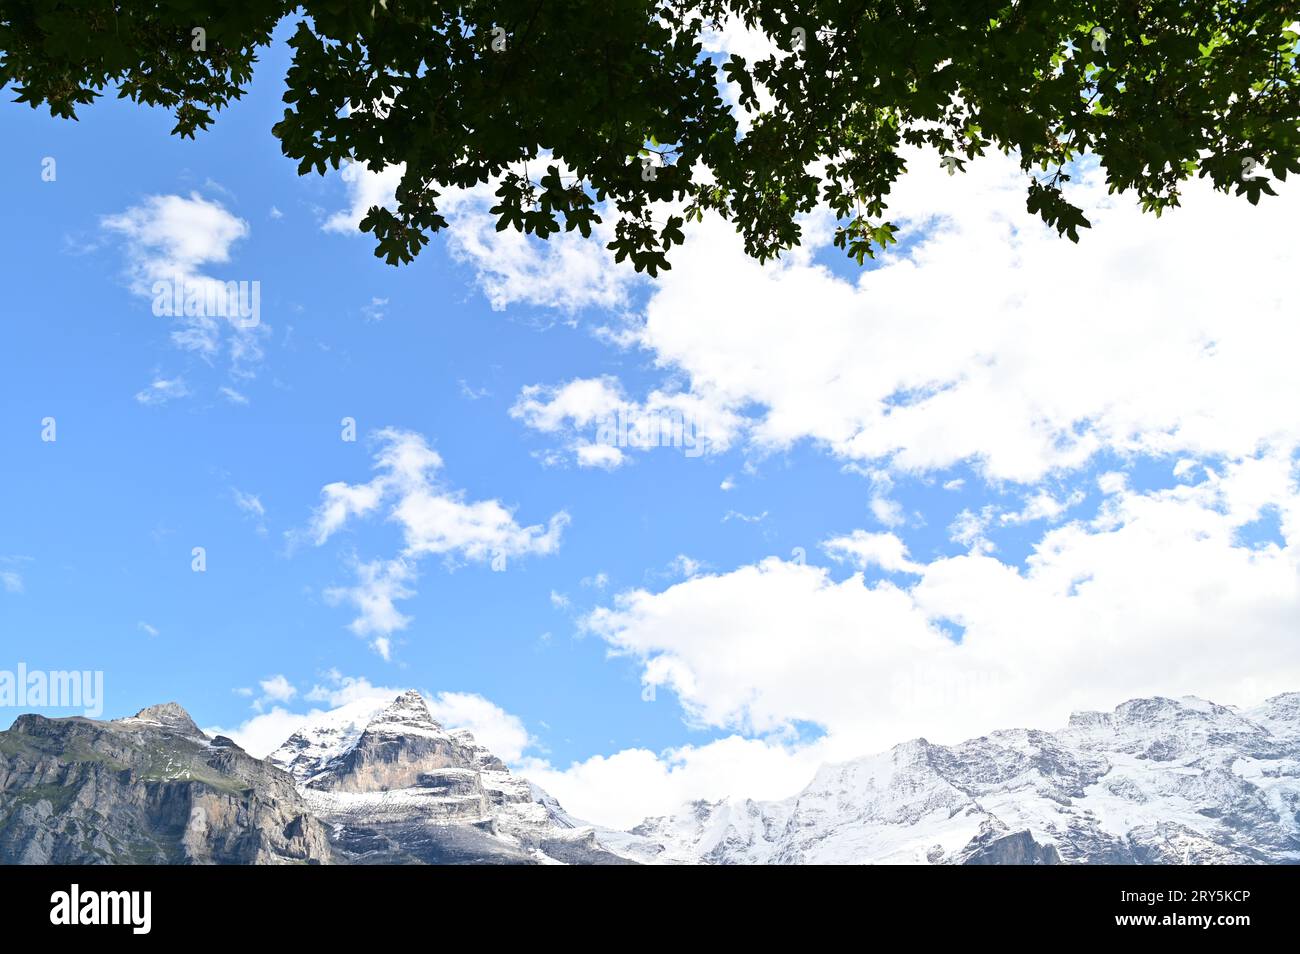 Leaves and snow mountains that you can see under the clear sky with white clouds Stock Photo